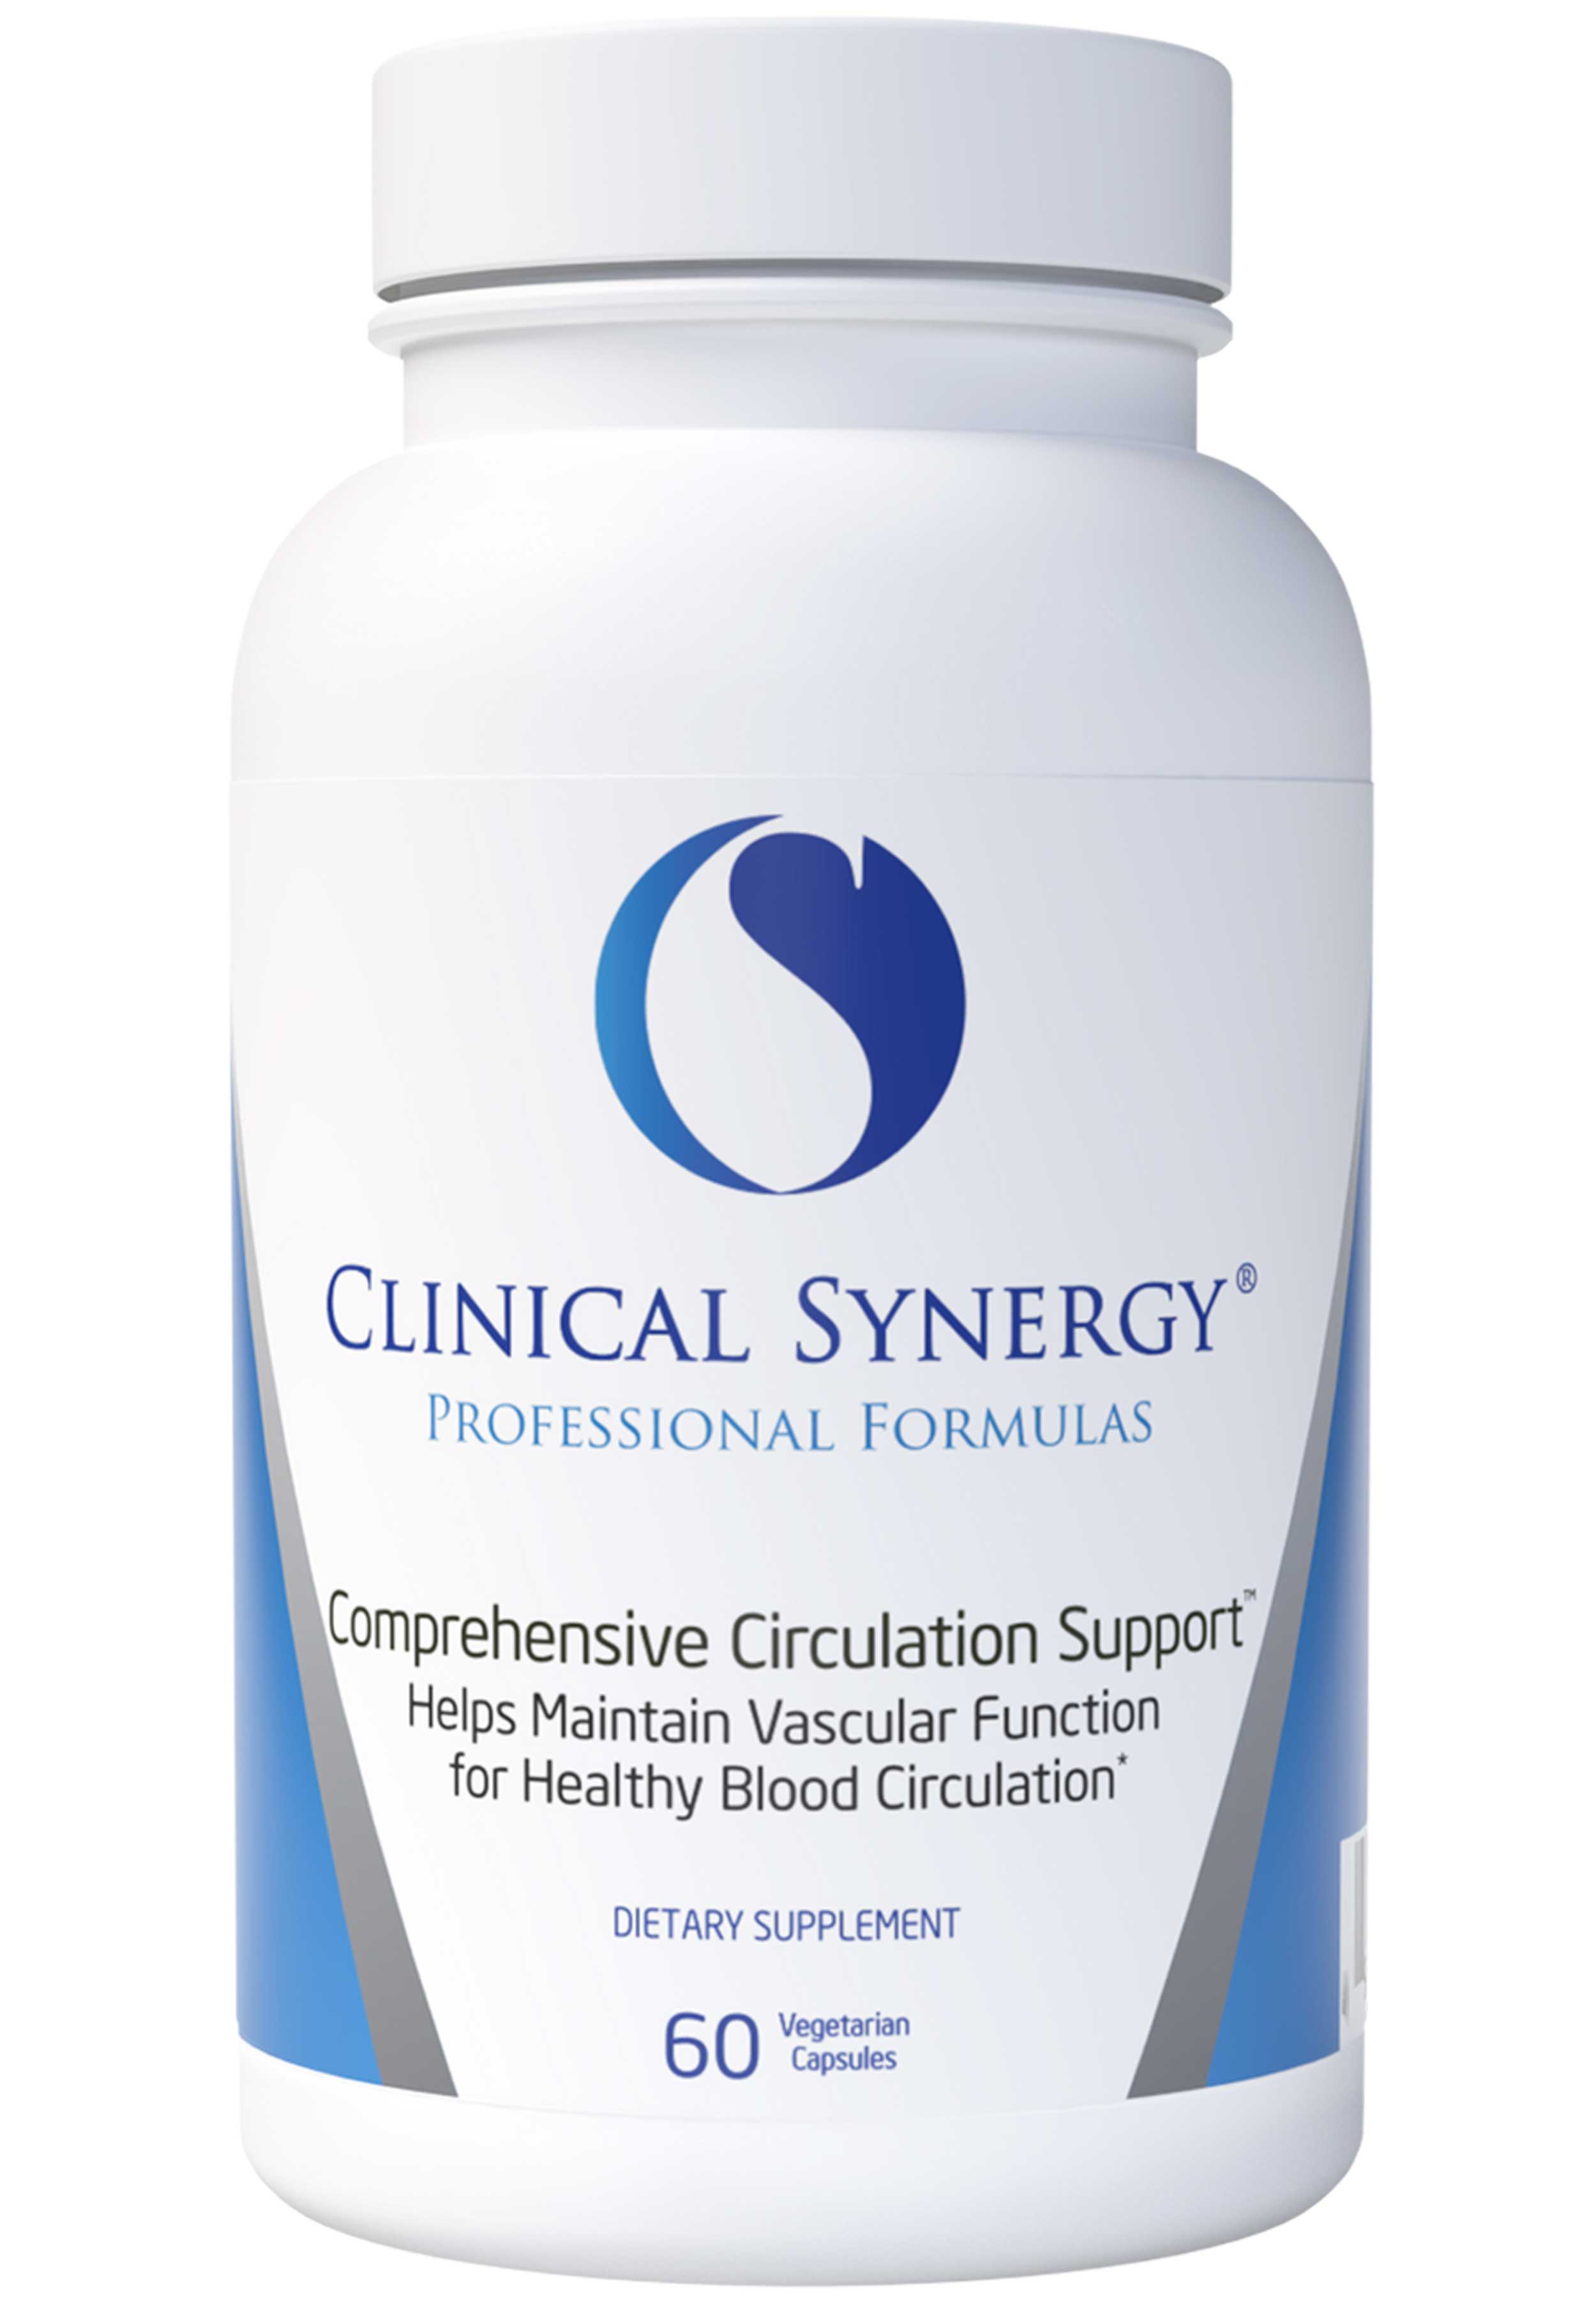 Clinical Synergy Professional Formulas Comprehensive Circulation Support